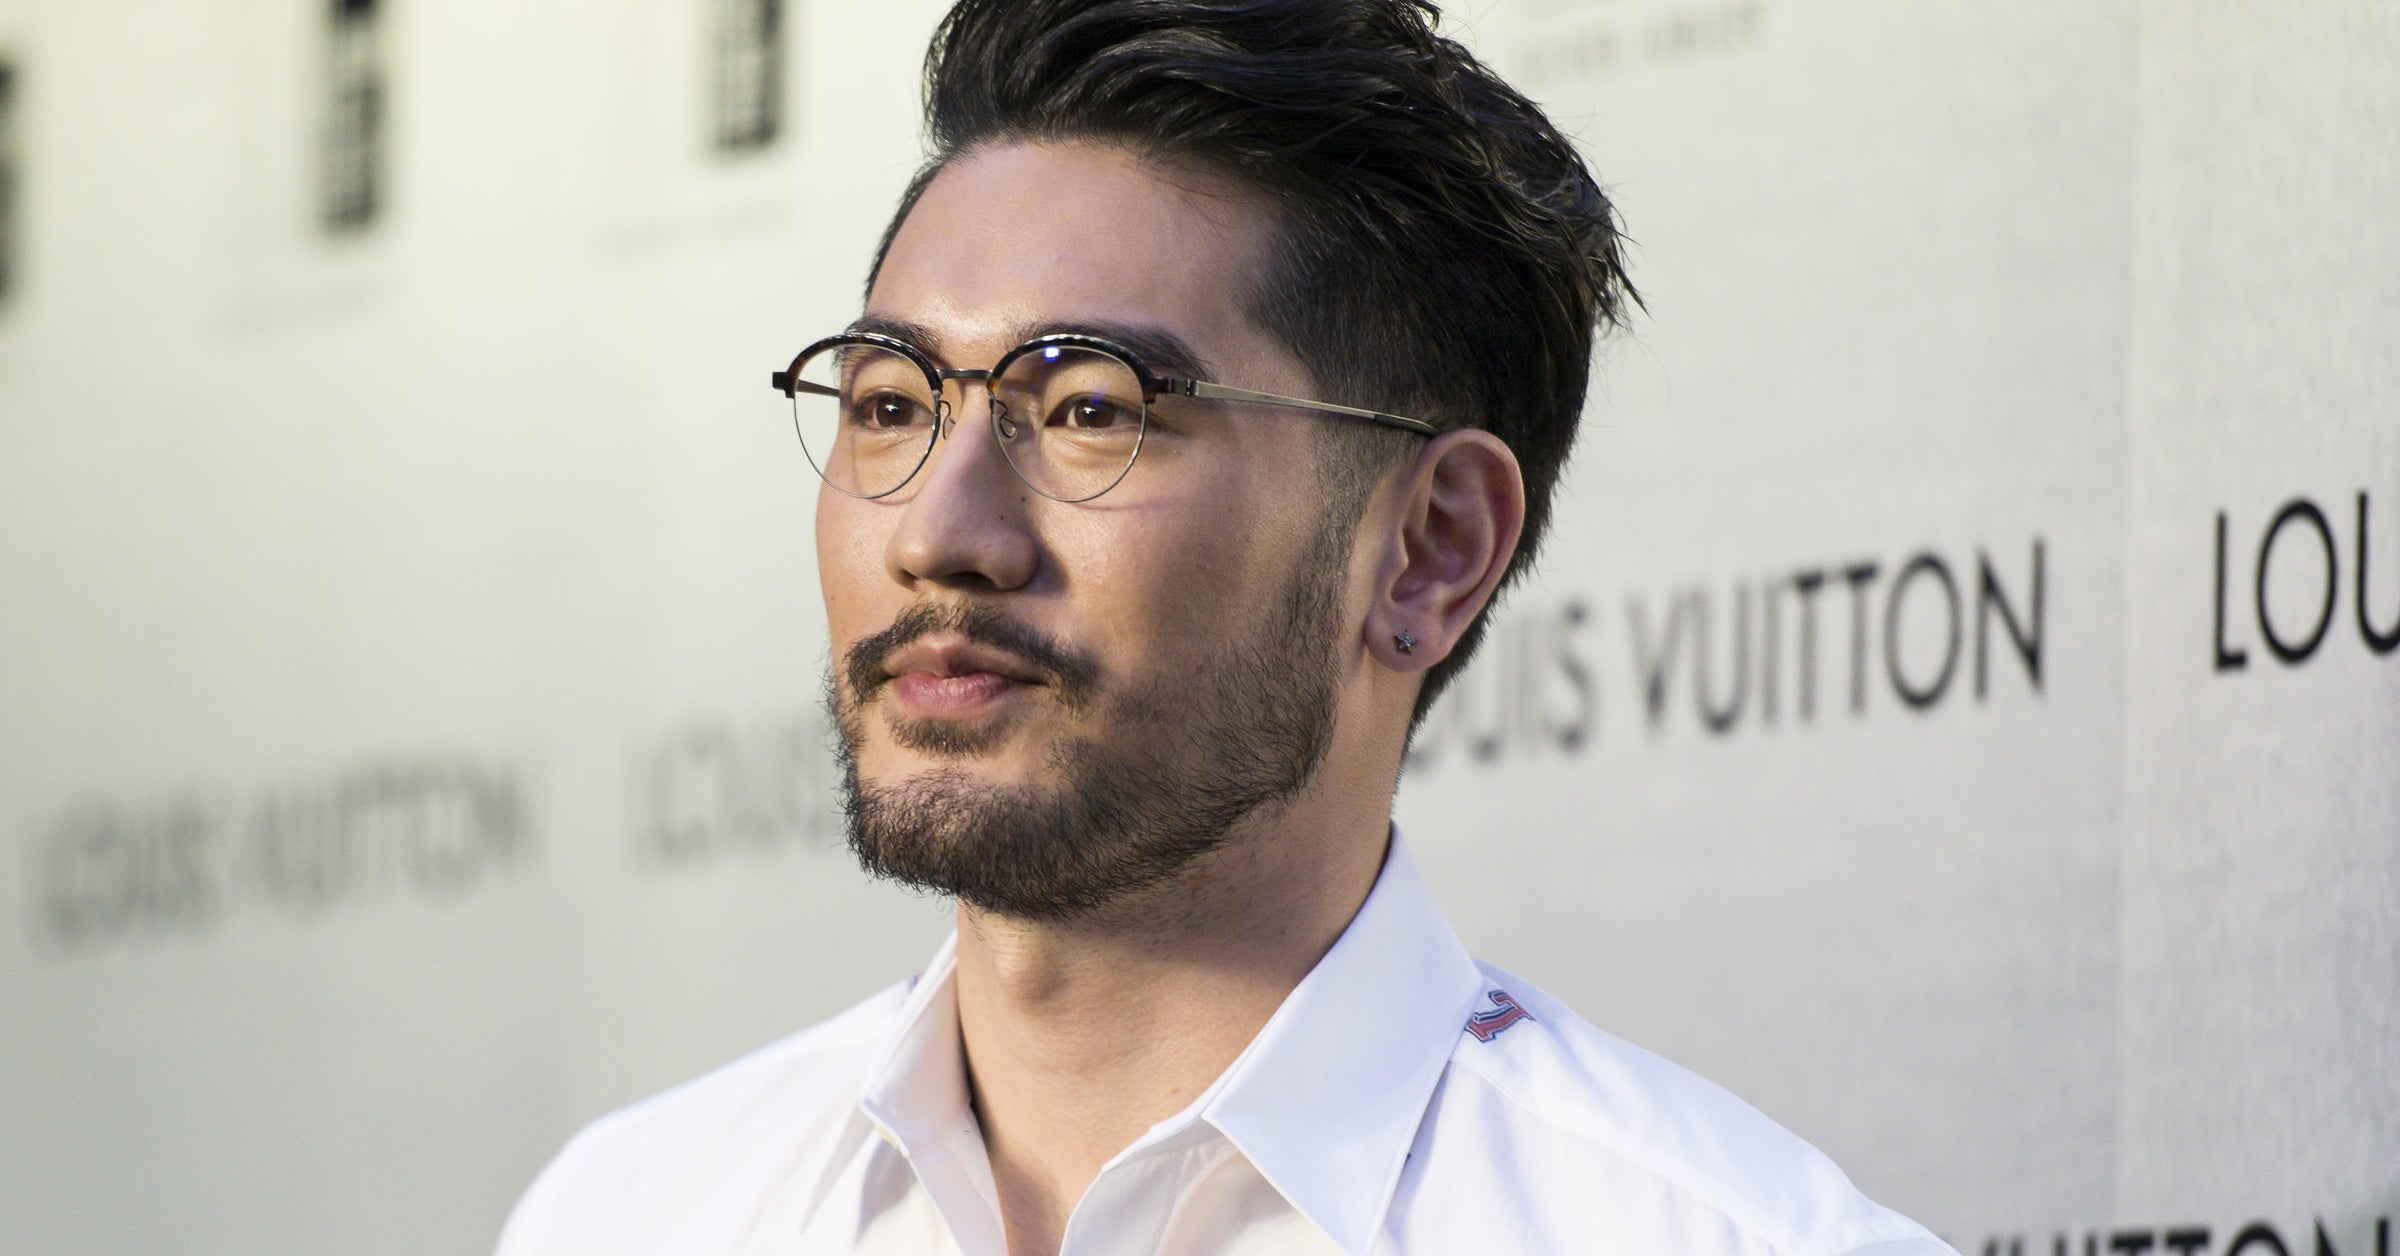 Actor And Model Godfrey Gao Died While Filming A Reality TV Show In China